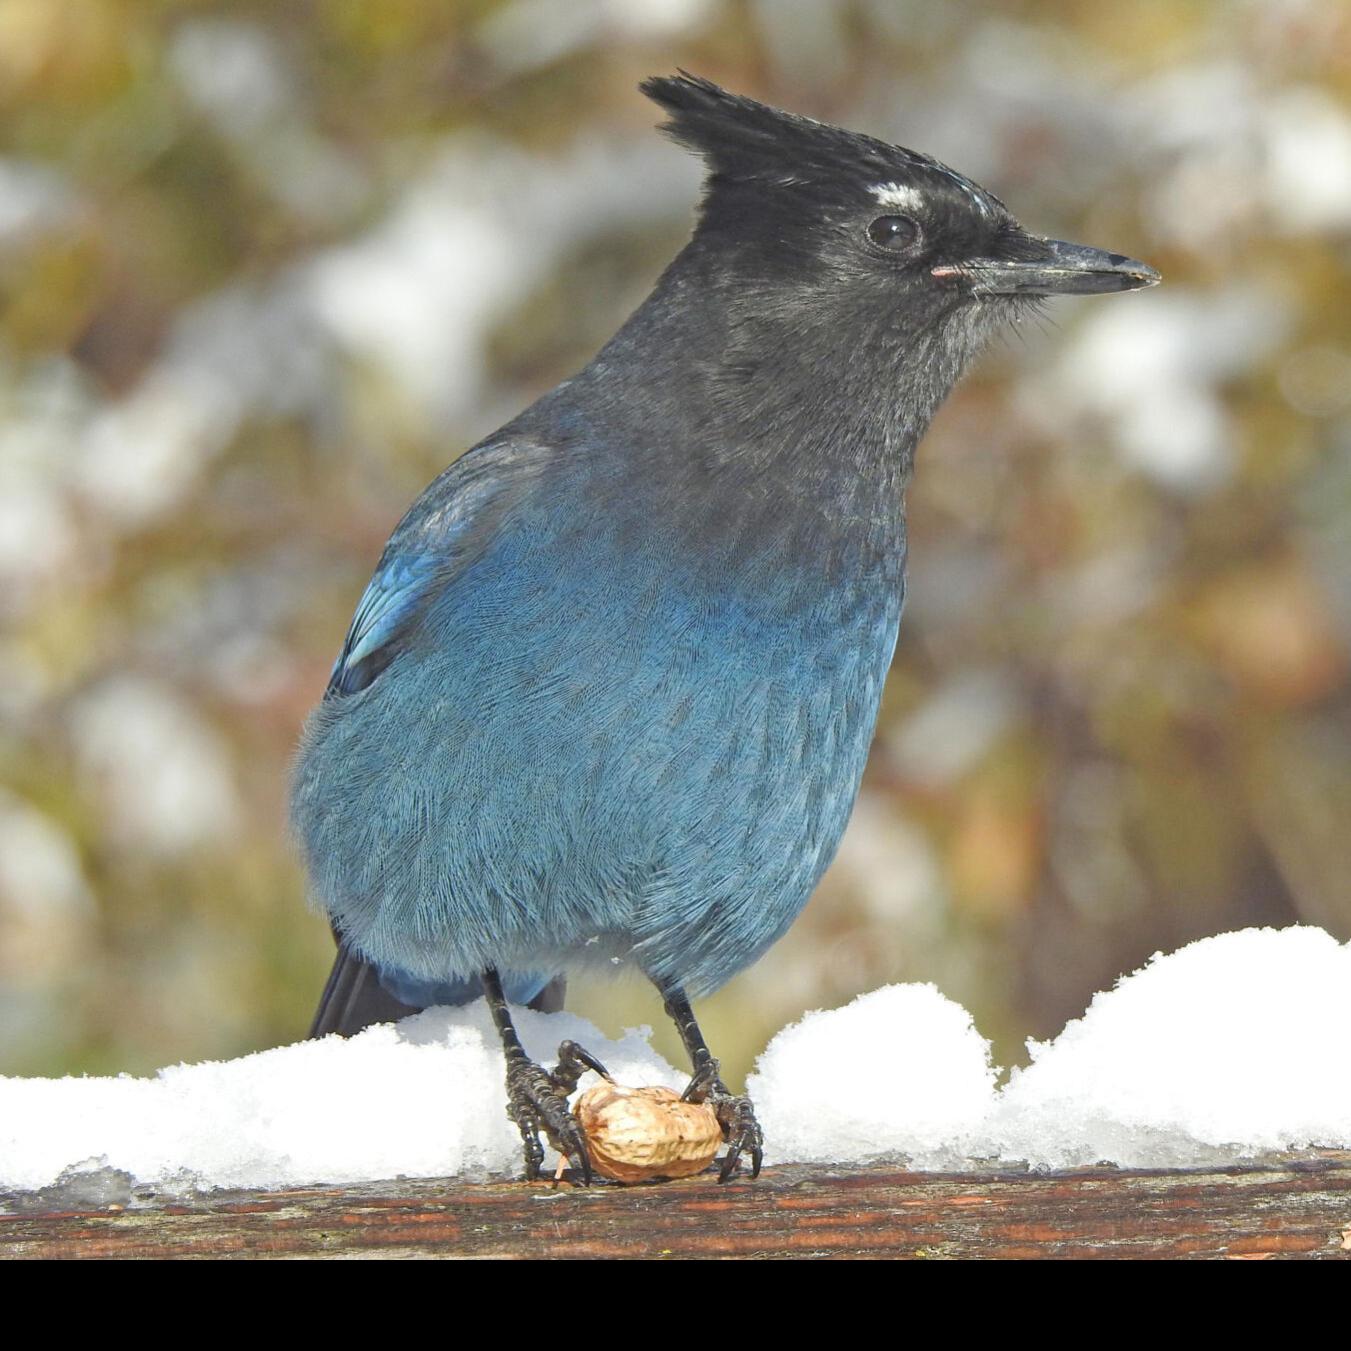 Similar Species to Steller's Jay, All About Birds, Cornell Lab of